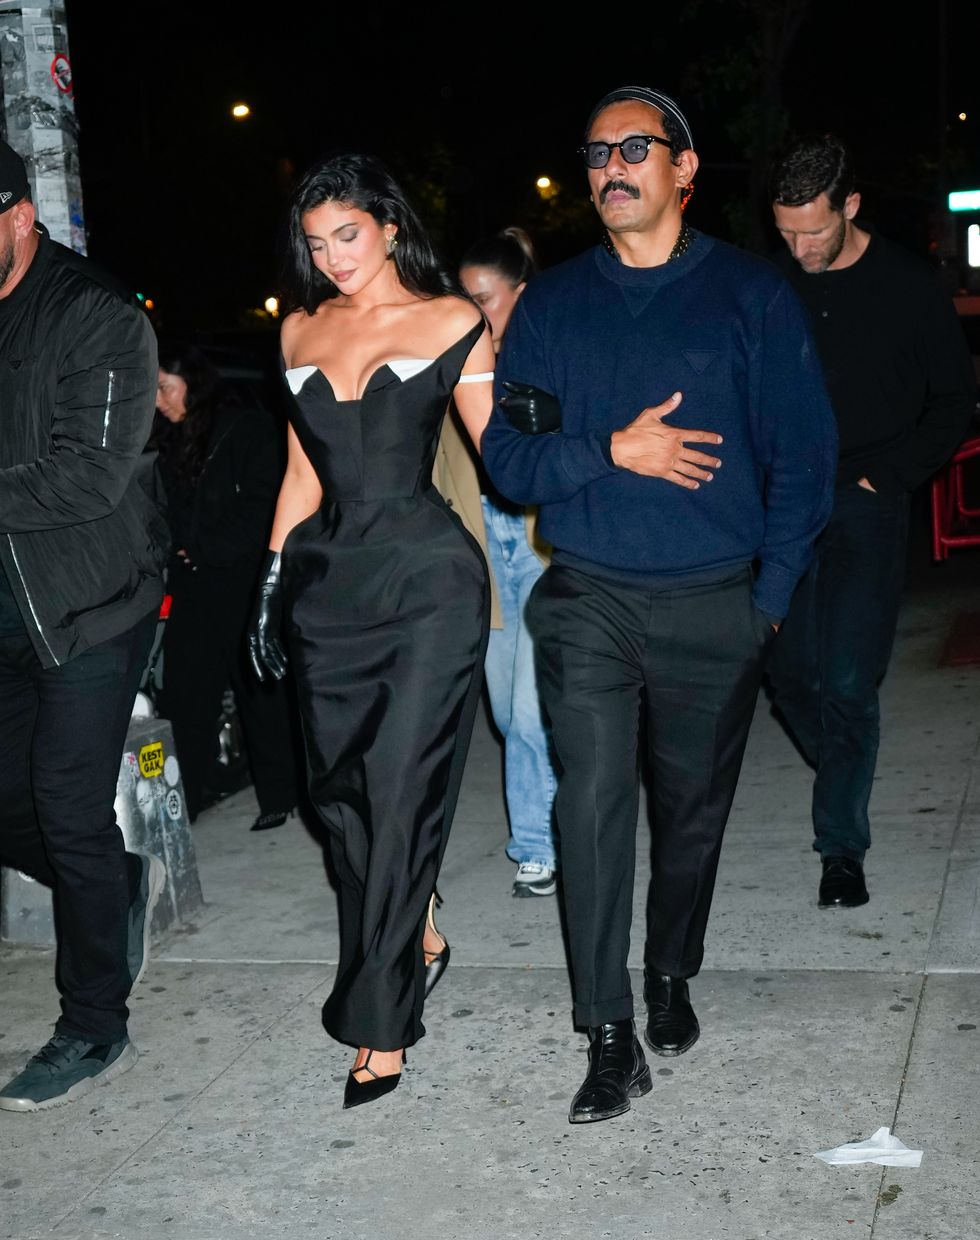 Kylie Jenner Wore Corseted Jean Paul Gaultier Dress to Met Gala After Party